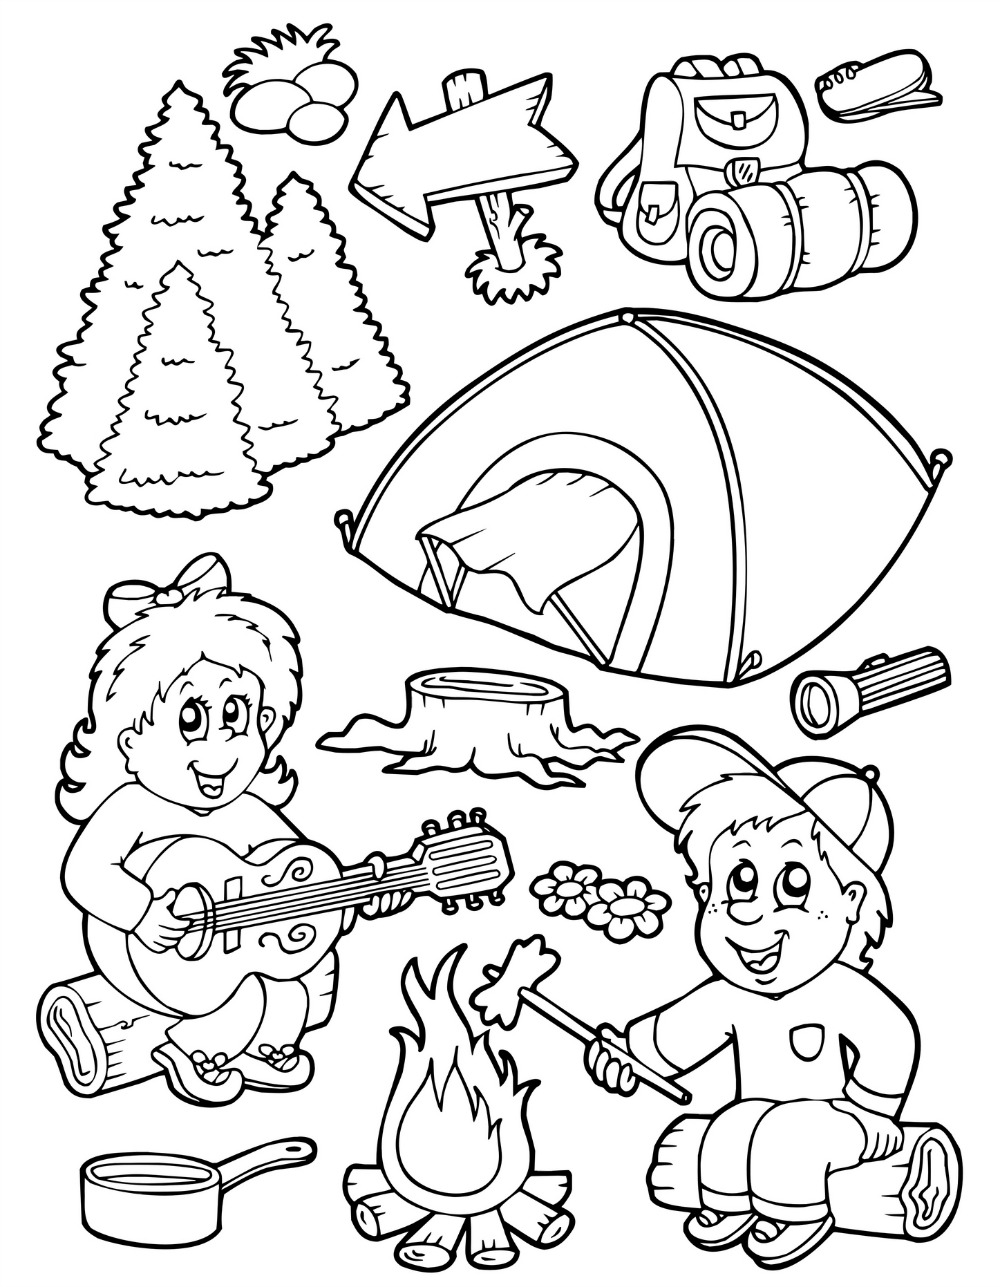 printable-camping-coloring-pages